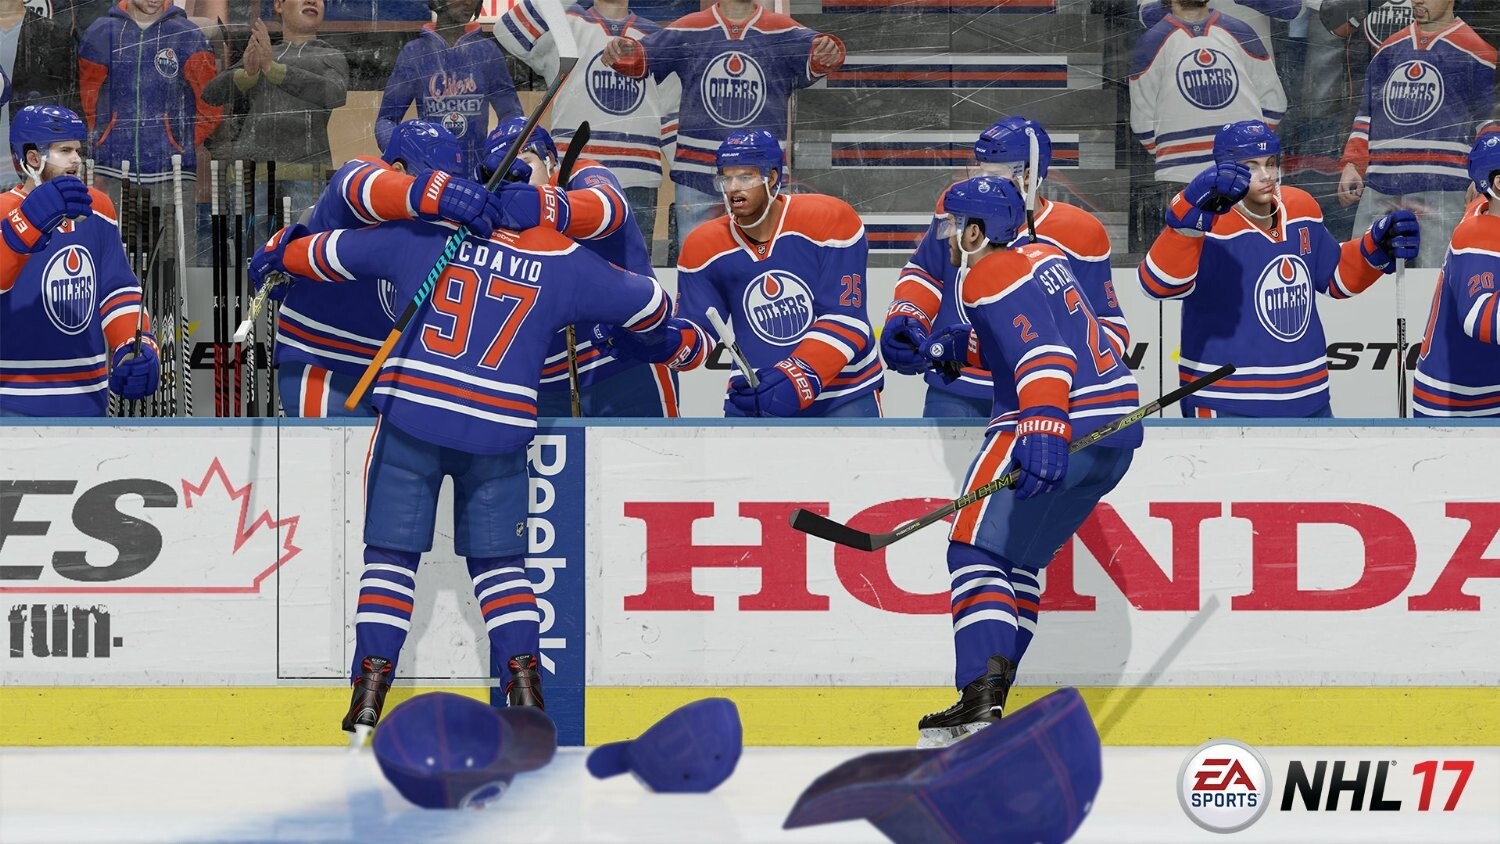 Nhl 17 (Xbox One) Review 3